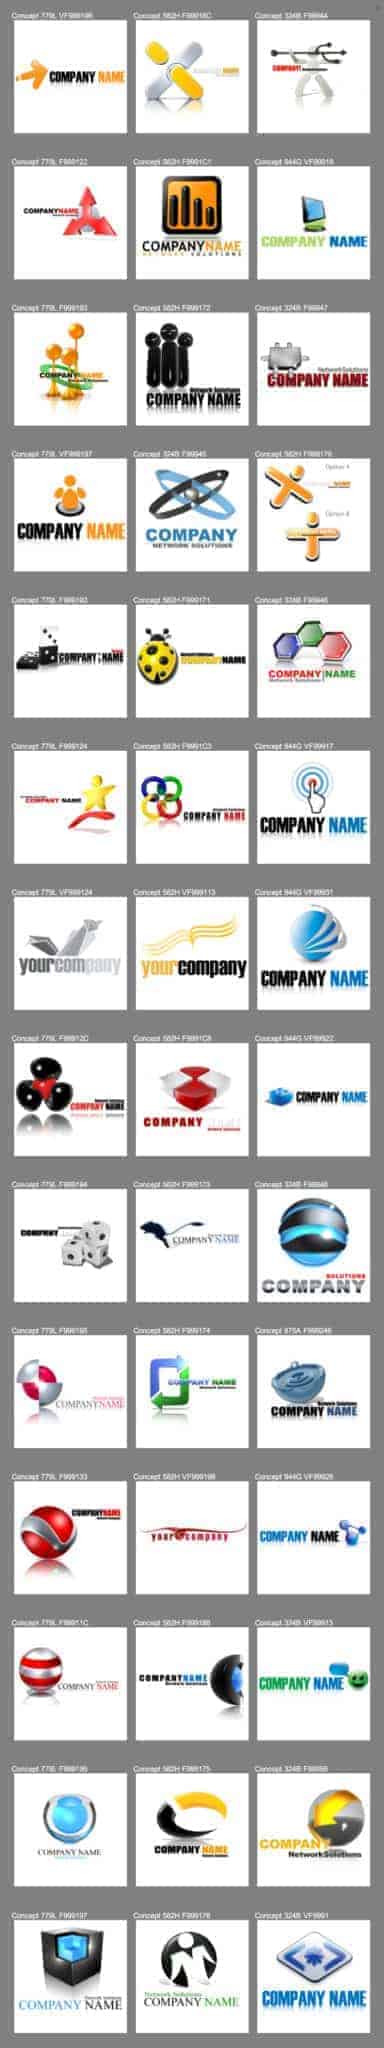 great Elements of a brand Logo